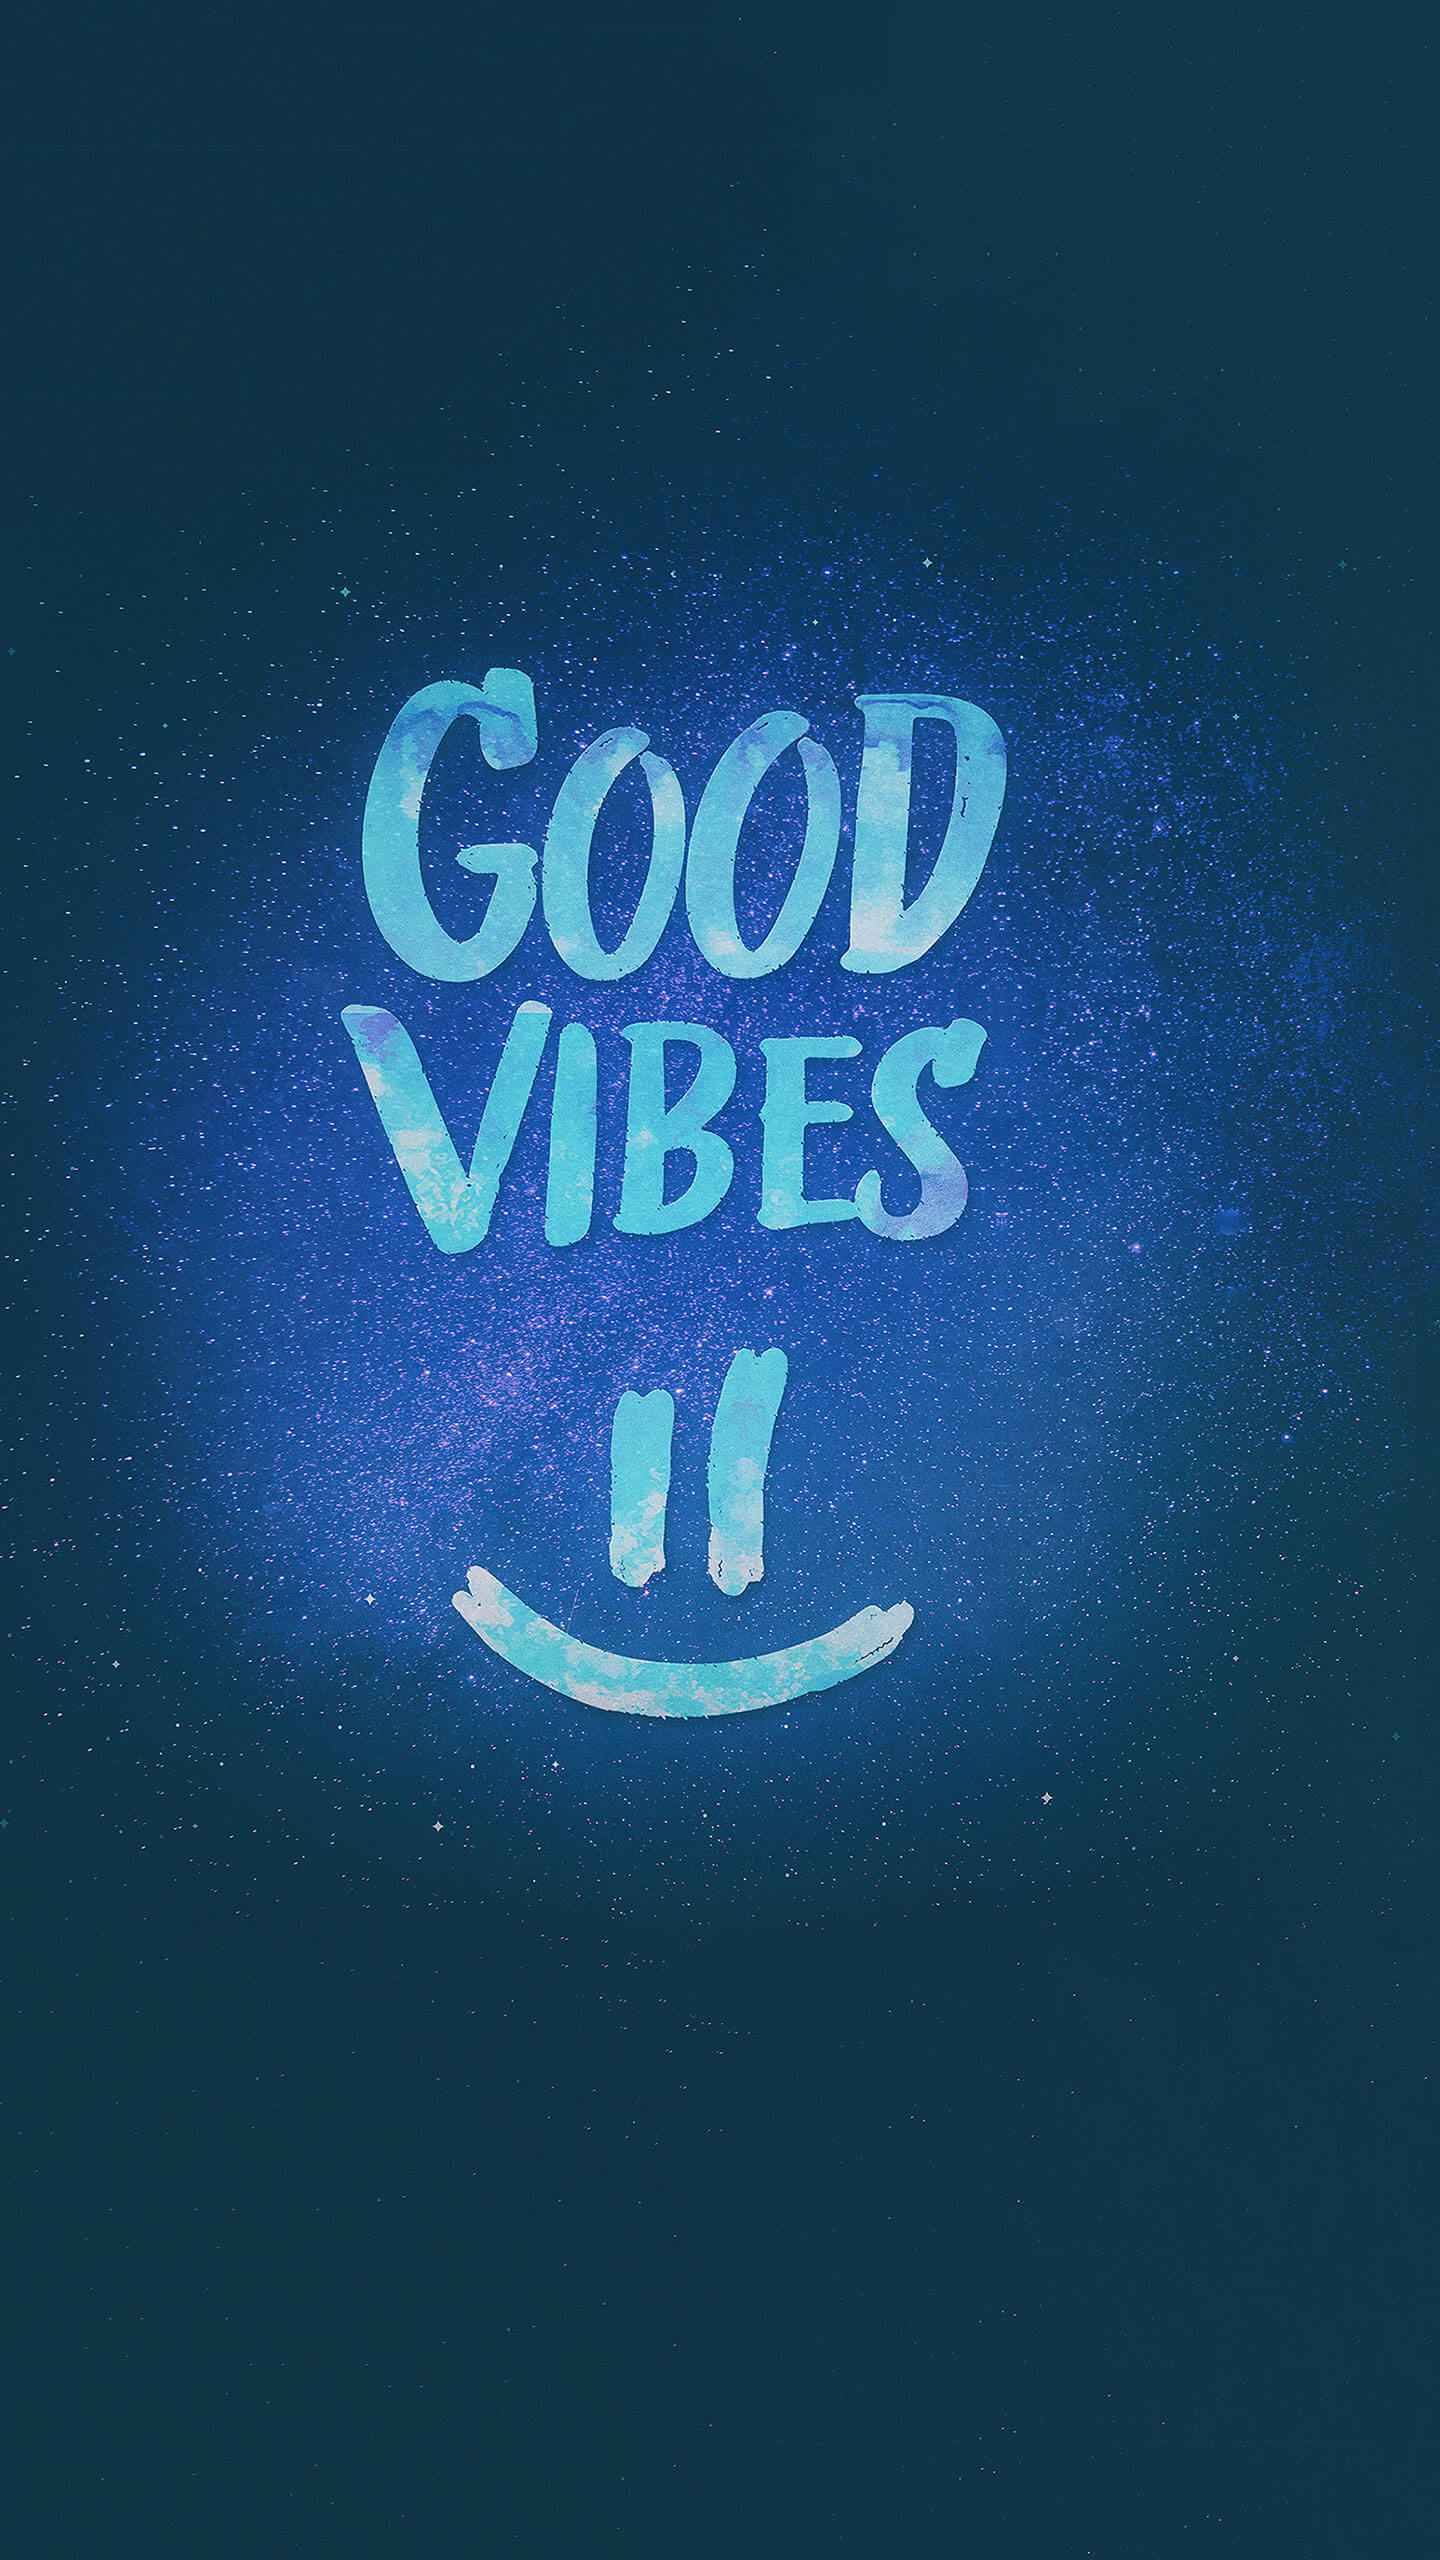 Good Vibes HD IPhone Wallpaper - IPhone Wallpapers : iPhone Wallpapers